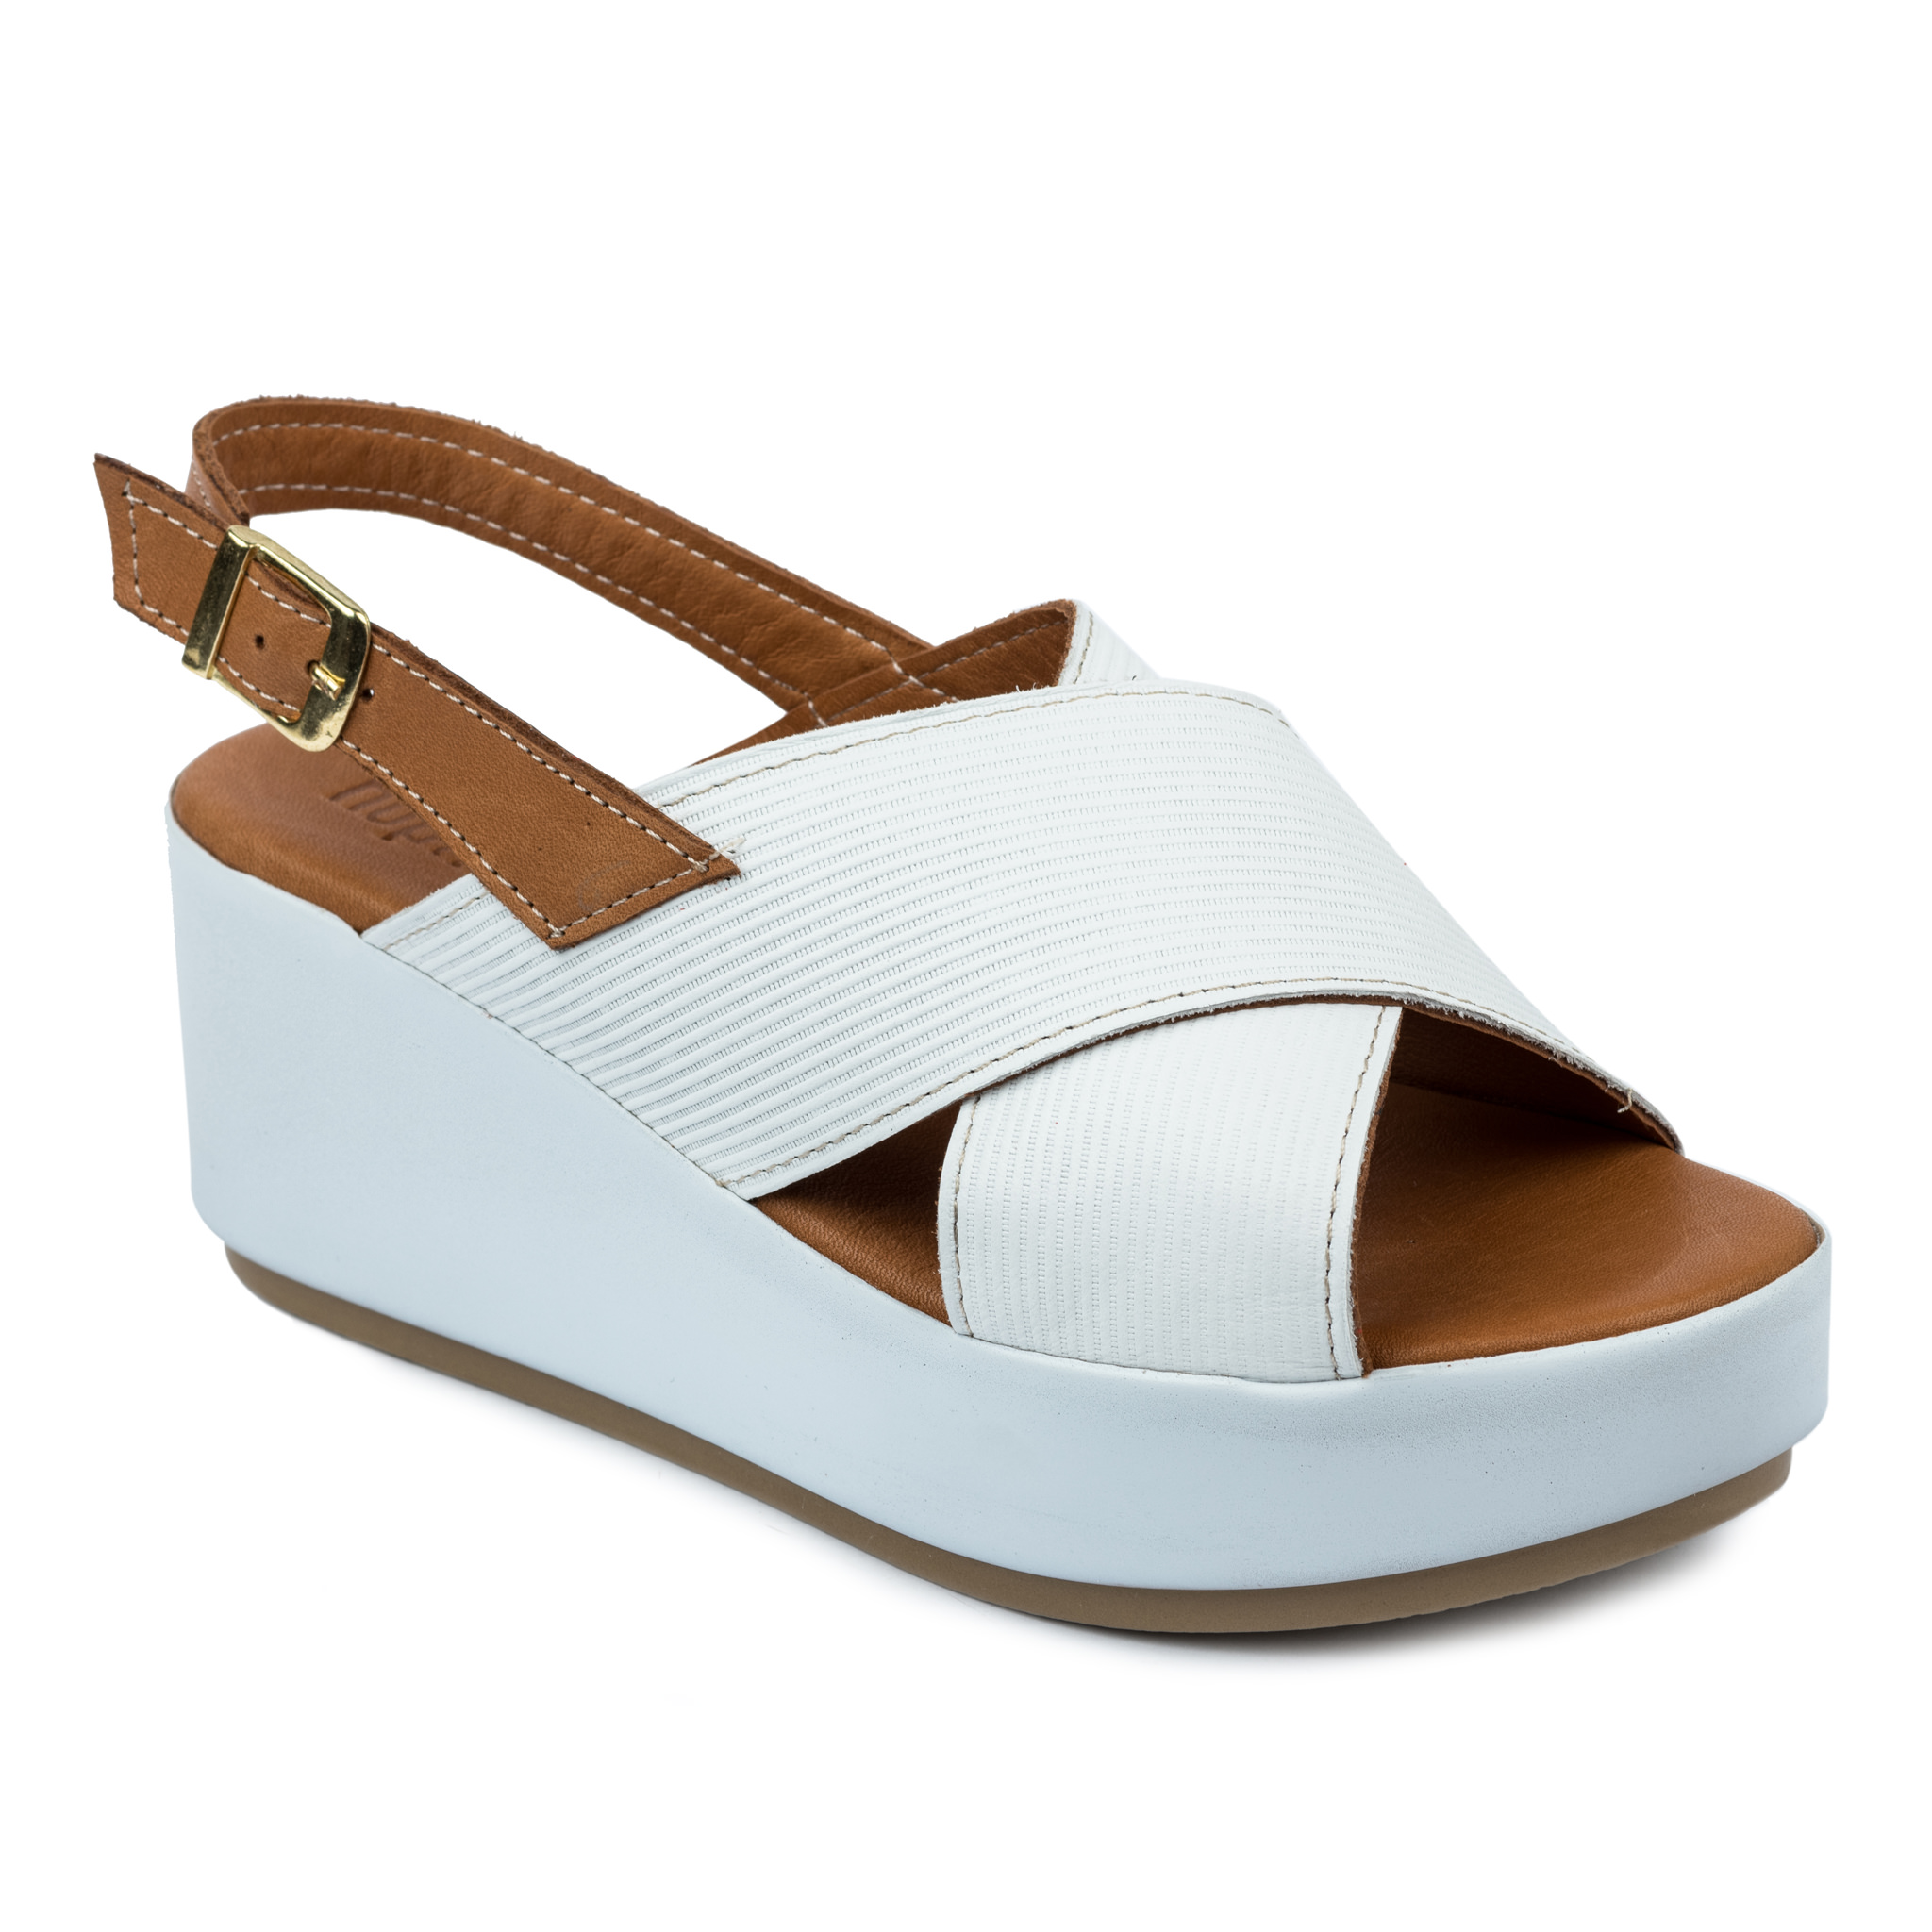 Leather sandals A603 - WHITE